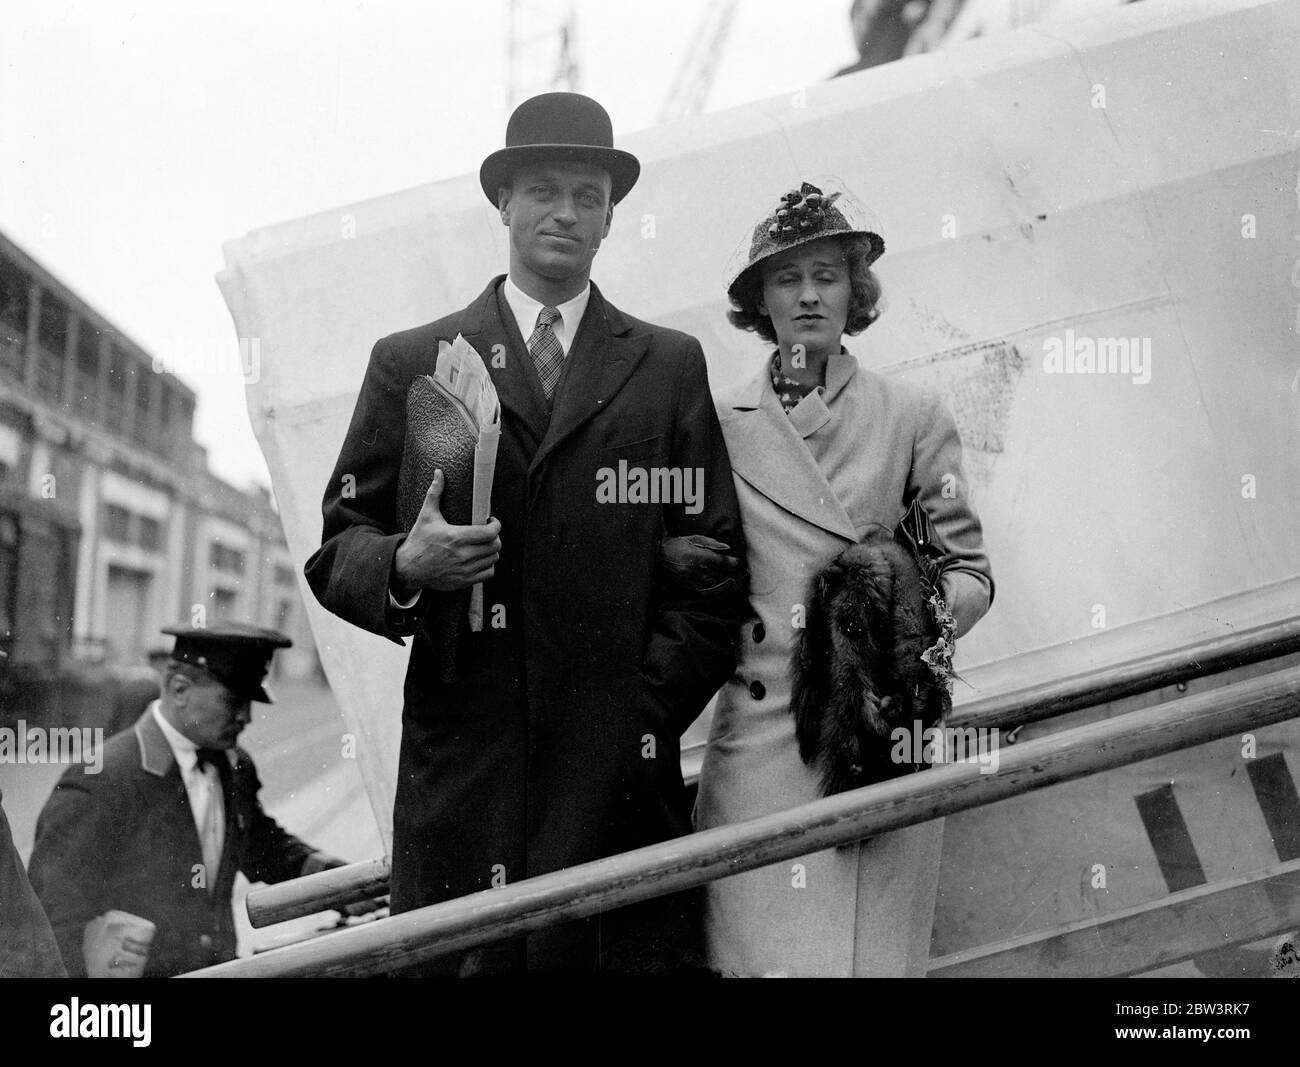 Son of American president sails for home . Mr James Roosevelt , son of President Franklin D Roosevelt of the United States , sailed for home on the liner , SS Manhatten from Southampton accompanied by his wife . Mr Roosevelt has been in England on a buisness trip . Photo shows , Mr and Mrs James Roosevelt at Southampton on departure . 8 May 1936 Stock Photo